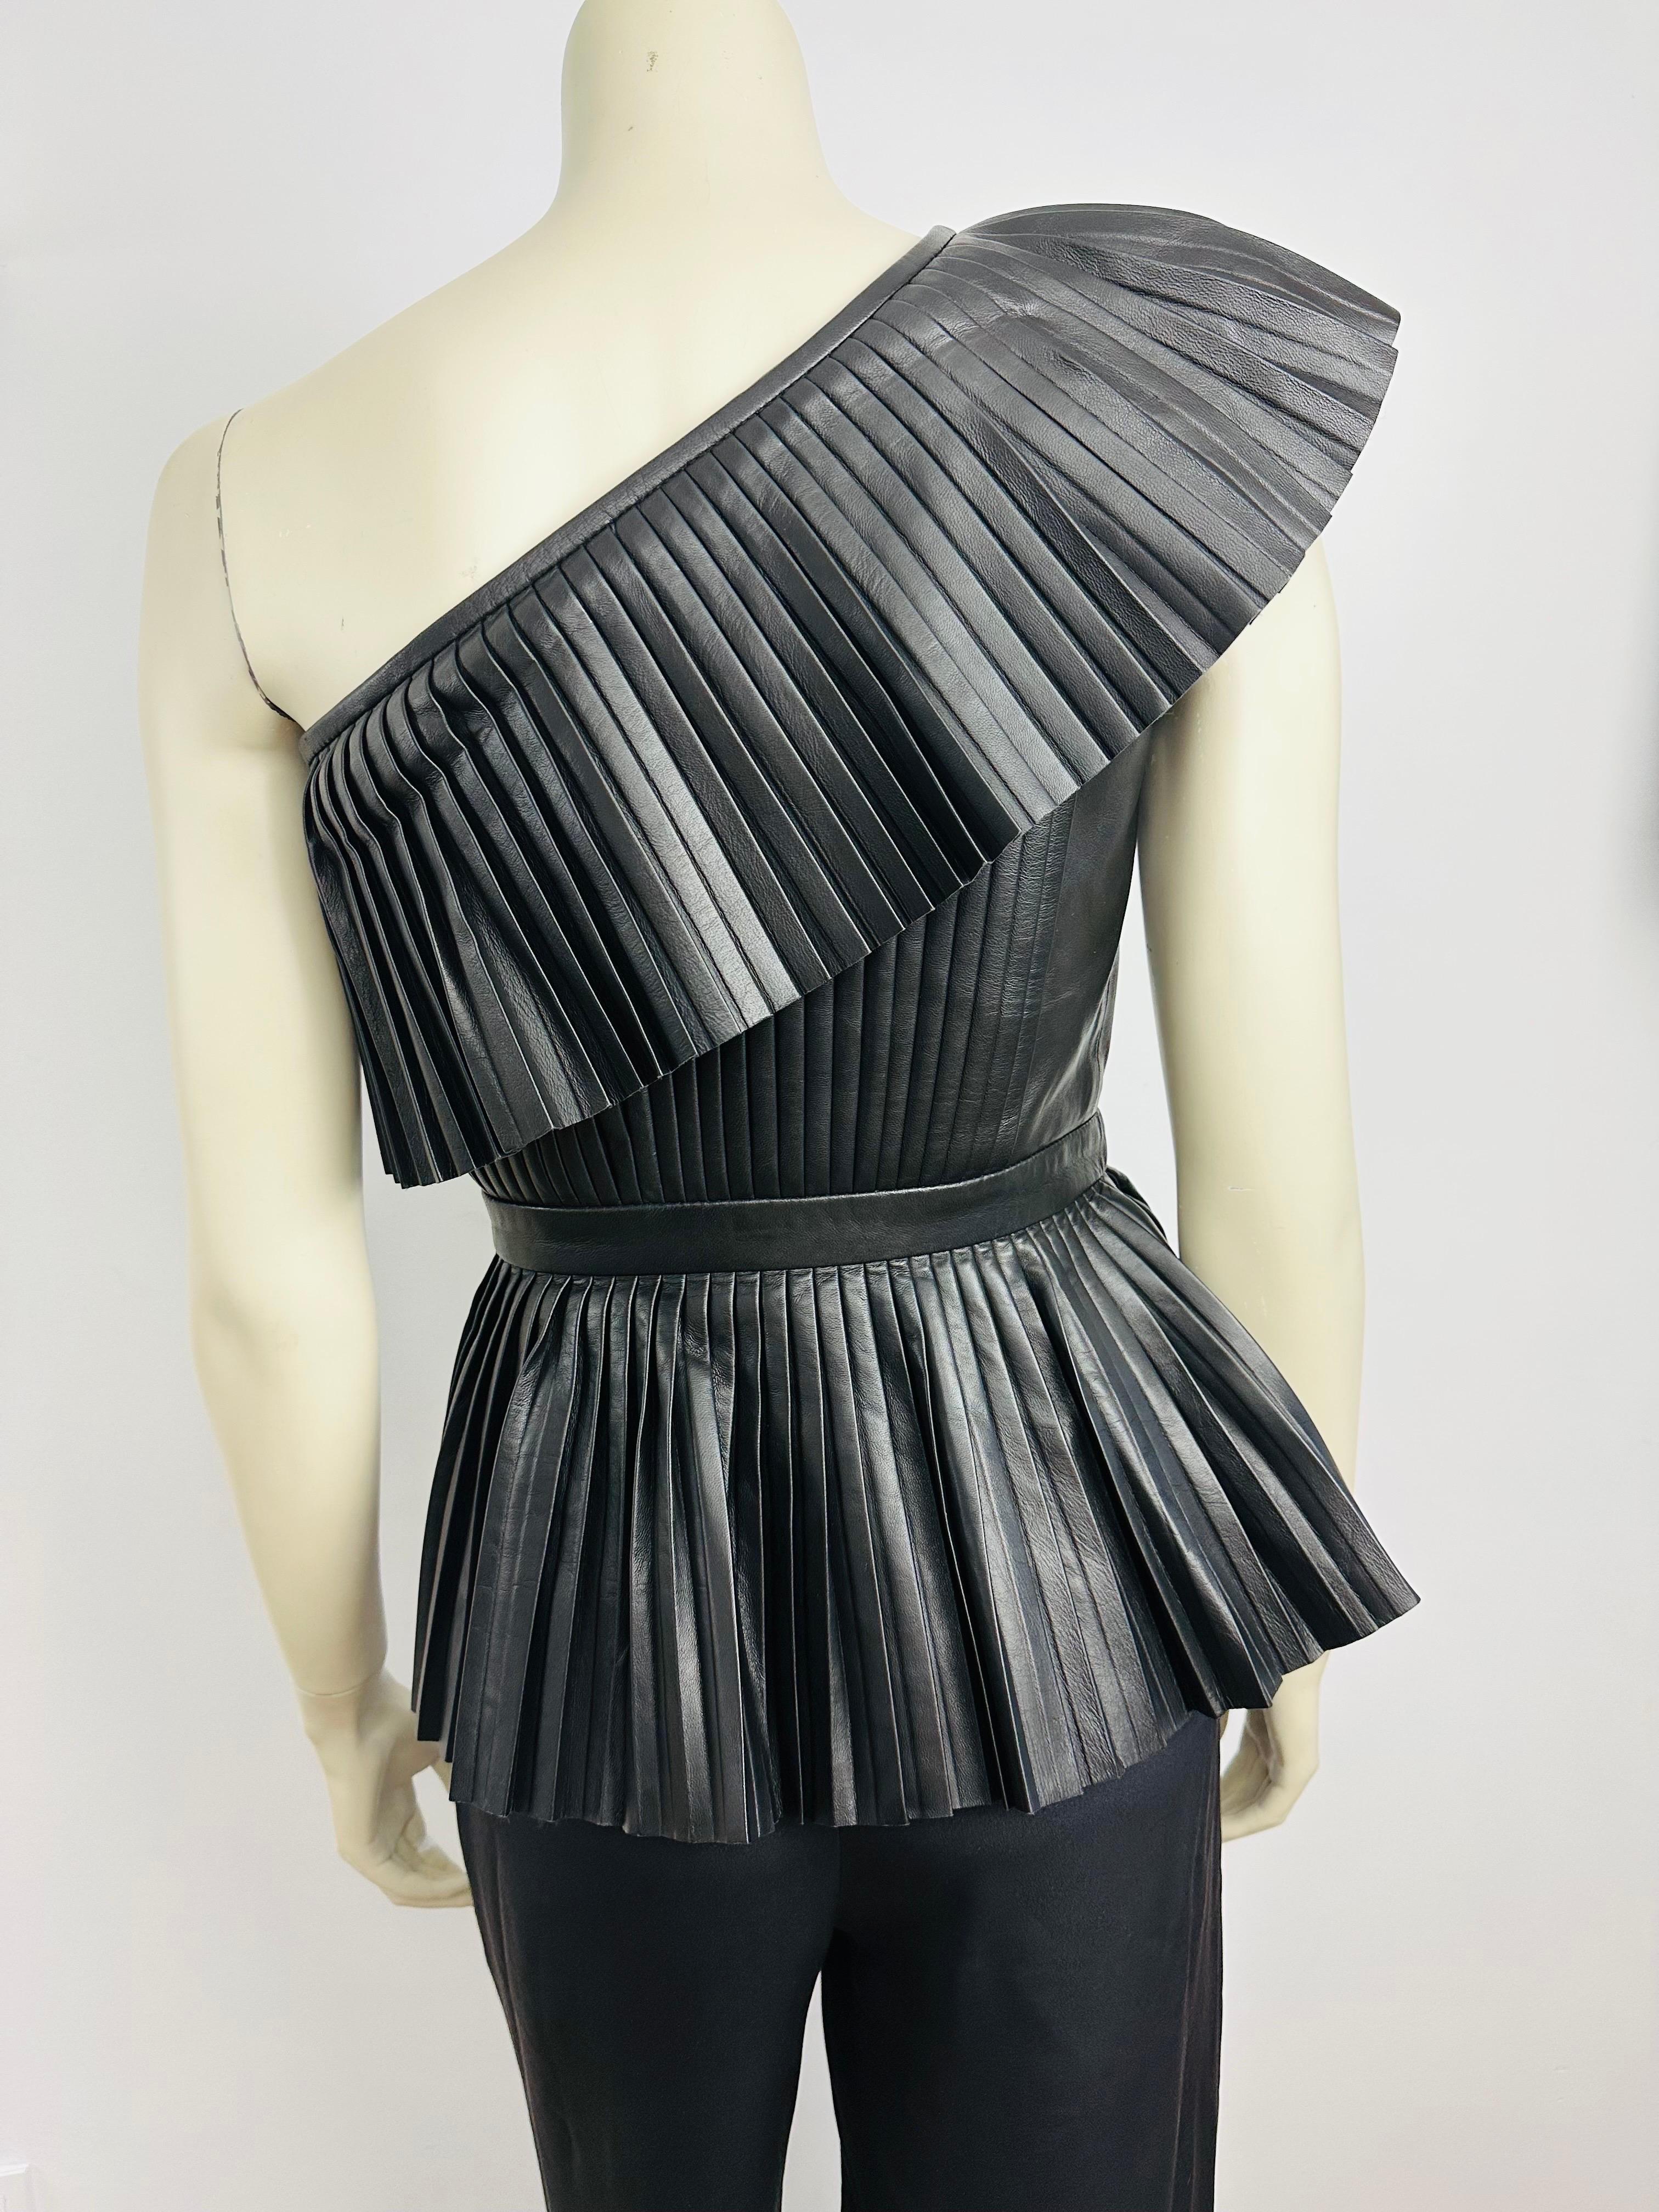 Balmain one shoulder pleated leather top Pre fall 2015 For Sale 4